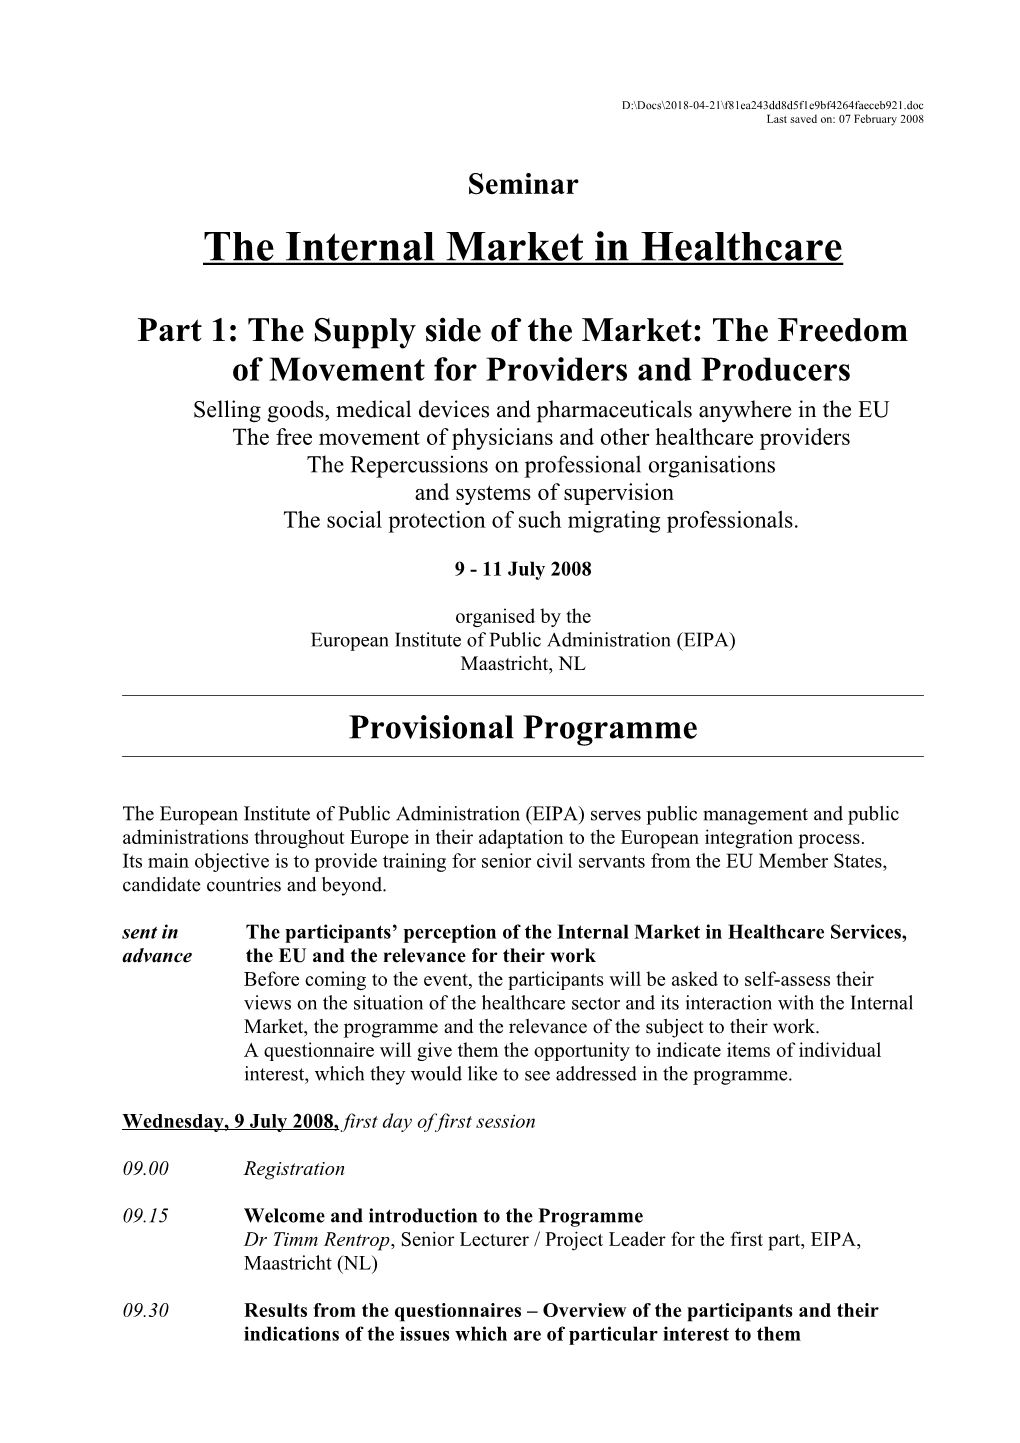 The Internal Market in Healthcare